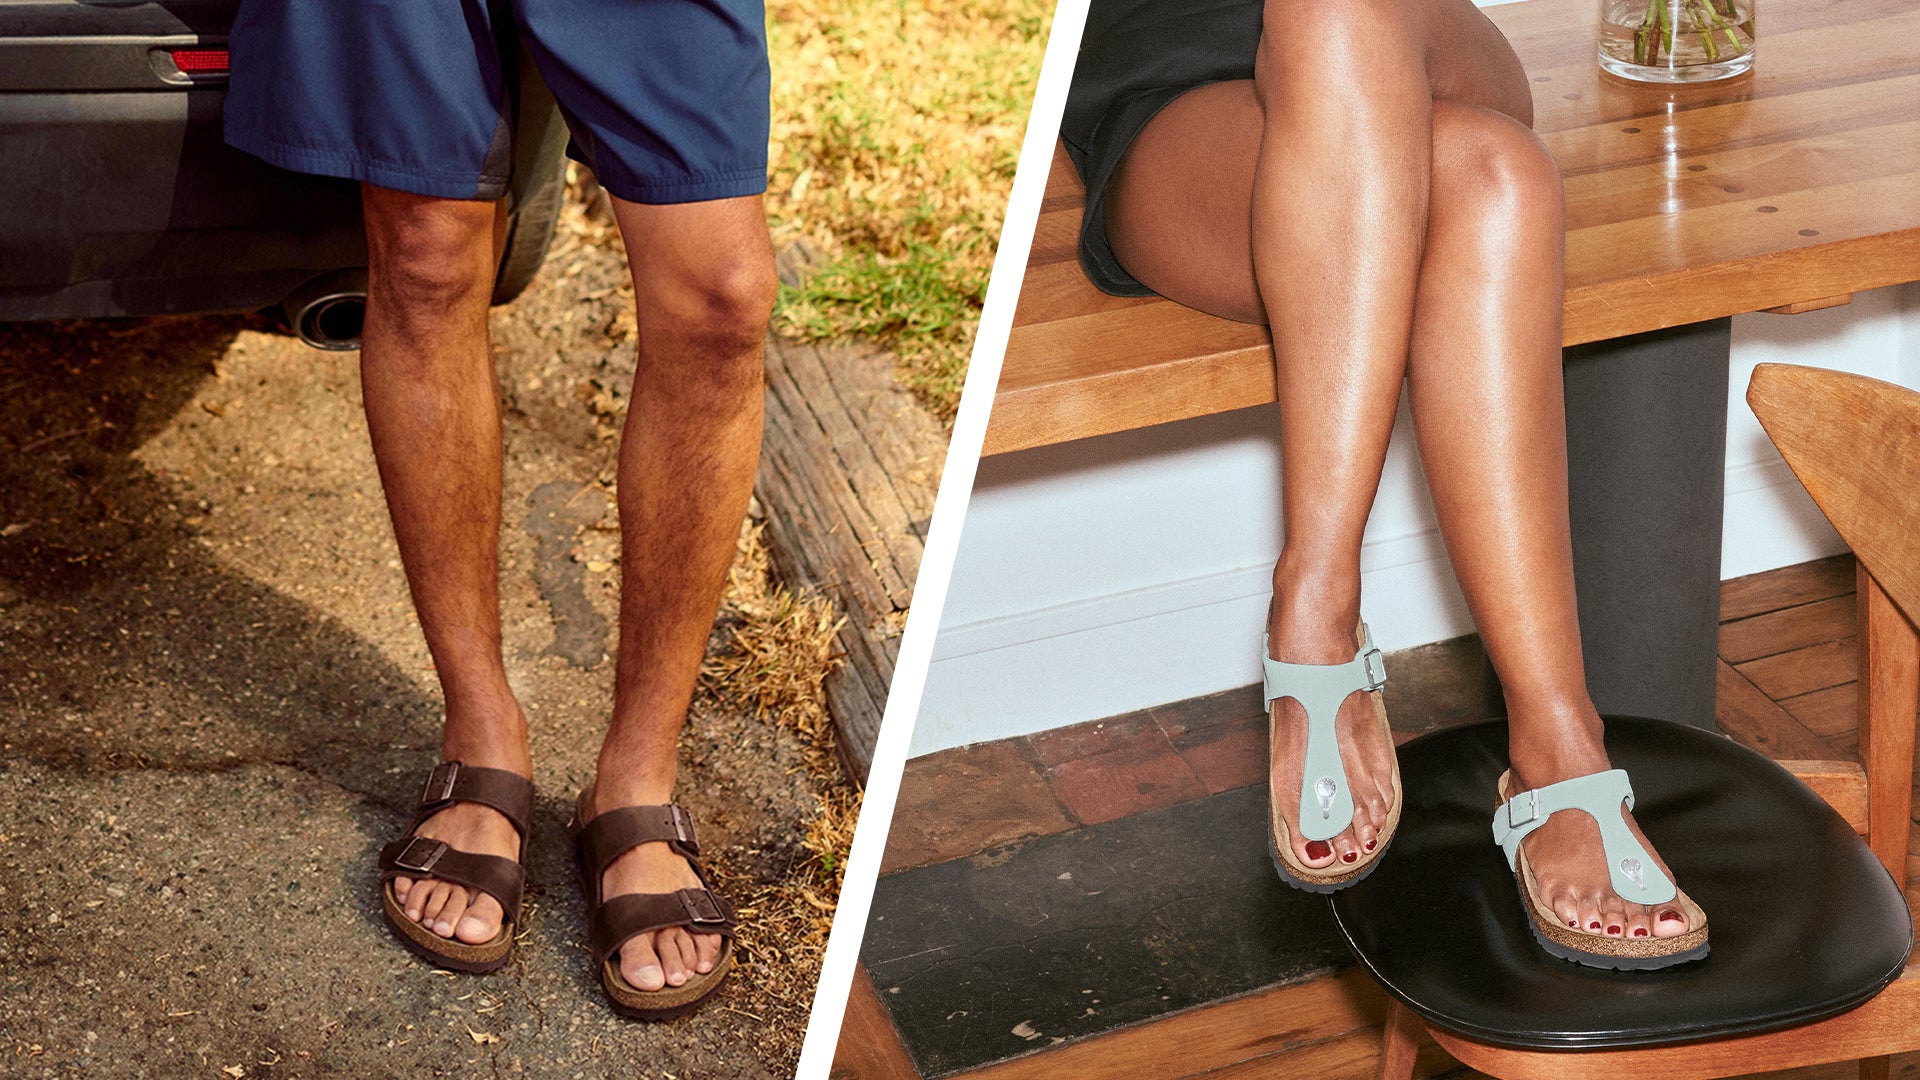 Why is BIRKENSTOCK the ultimate destination for comfort?